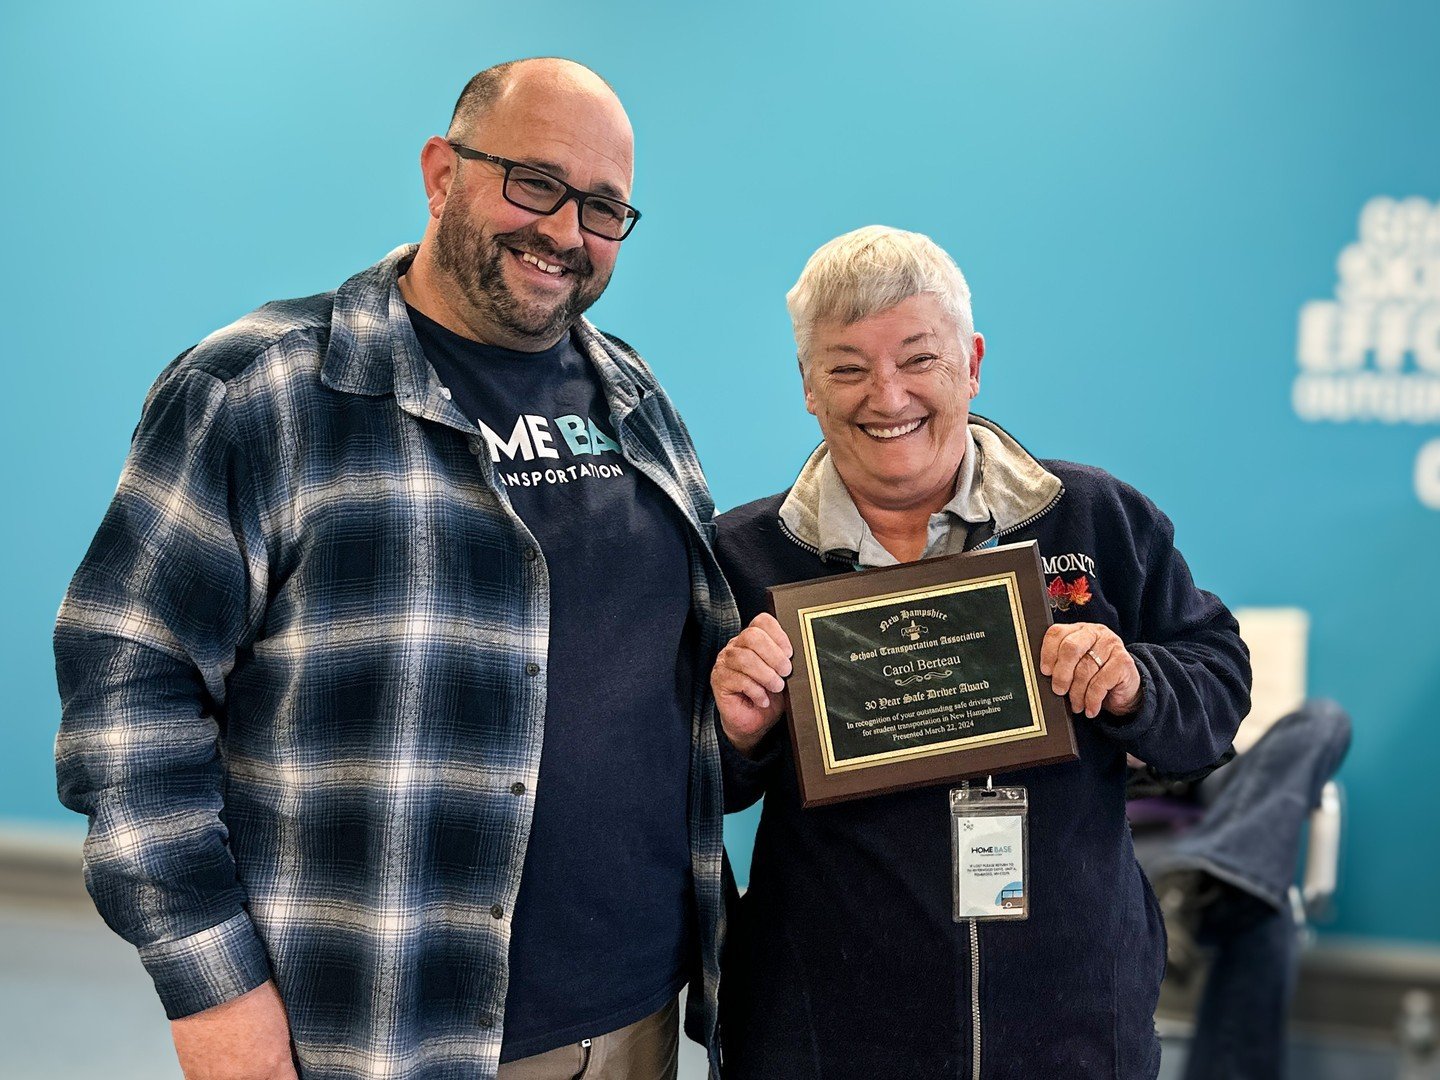 Congratulations, Carol and Eddie! 🎉🙌

Home Base recently went to the NHTSA recognition dinner where TWO of our drivers received awards for being long-term accident-free drivers!

🏆 30 Year Safe Driver Award to Carol
🏆 25 Year Safe Driver Award to